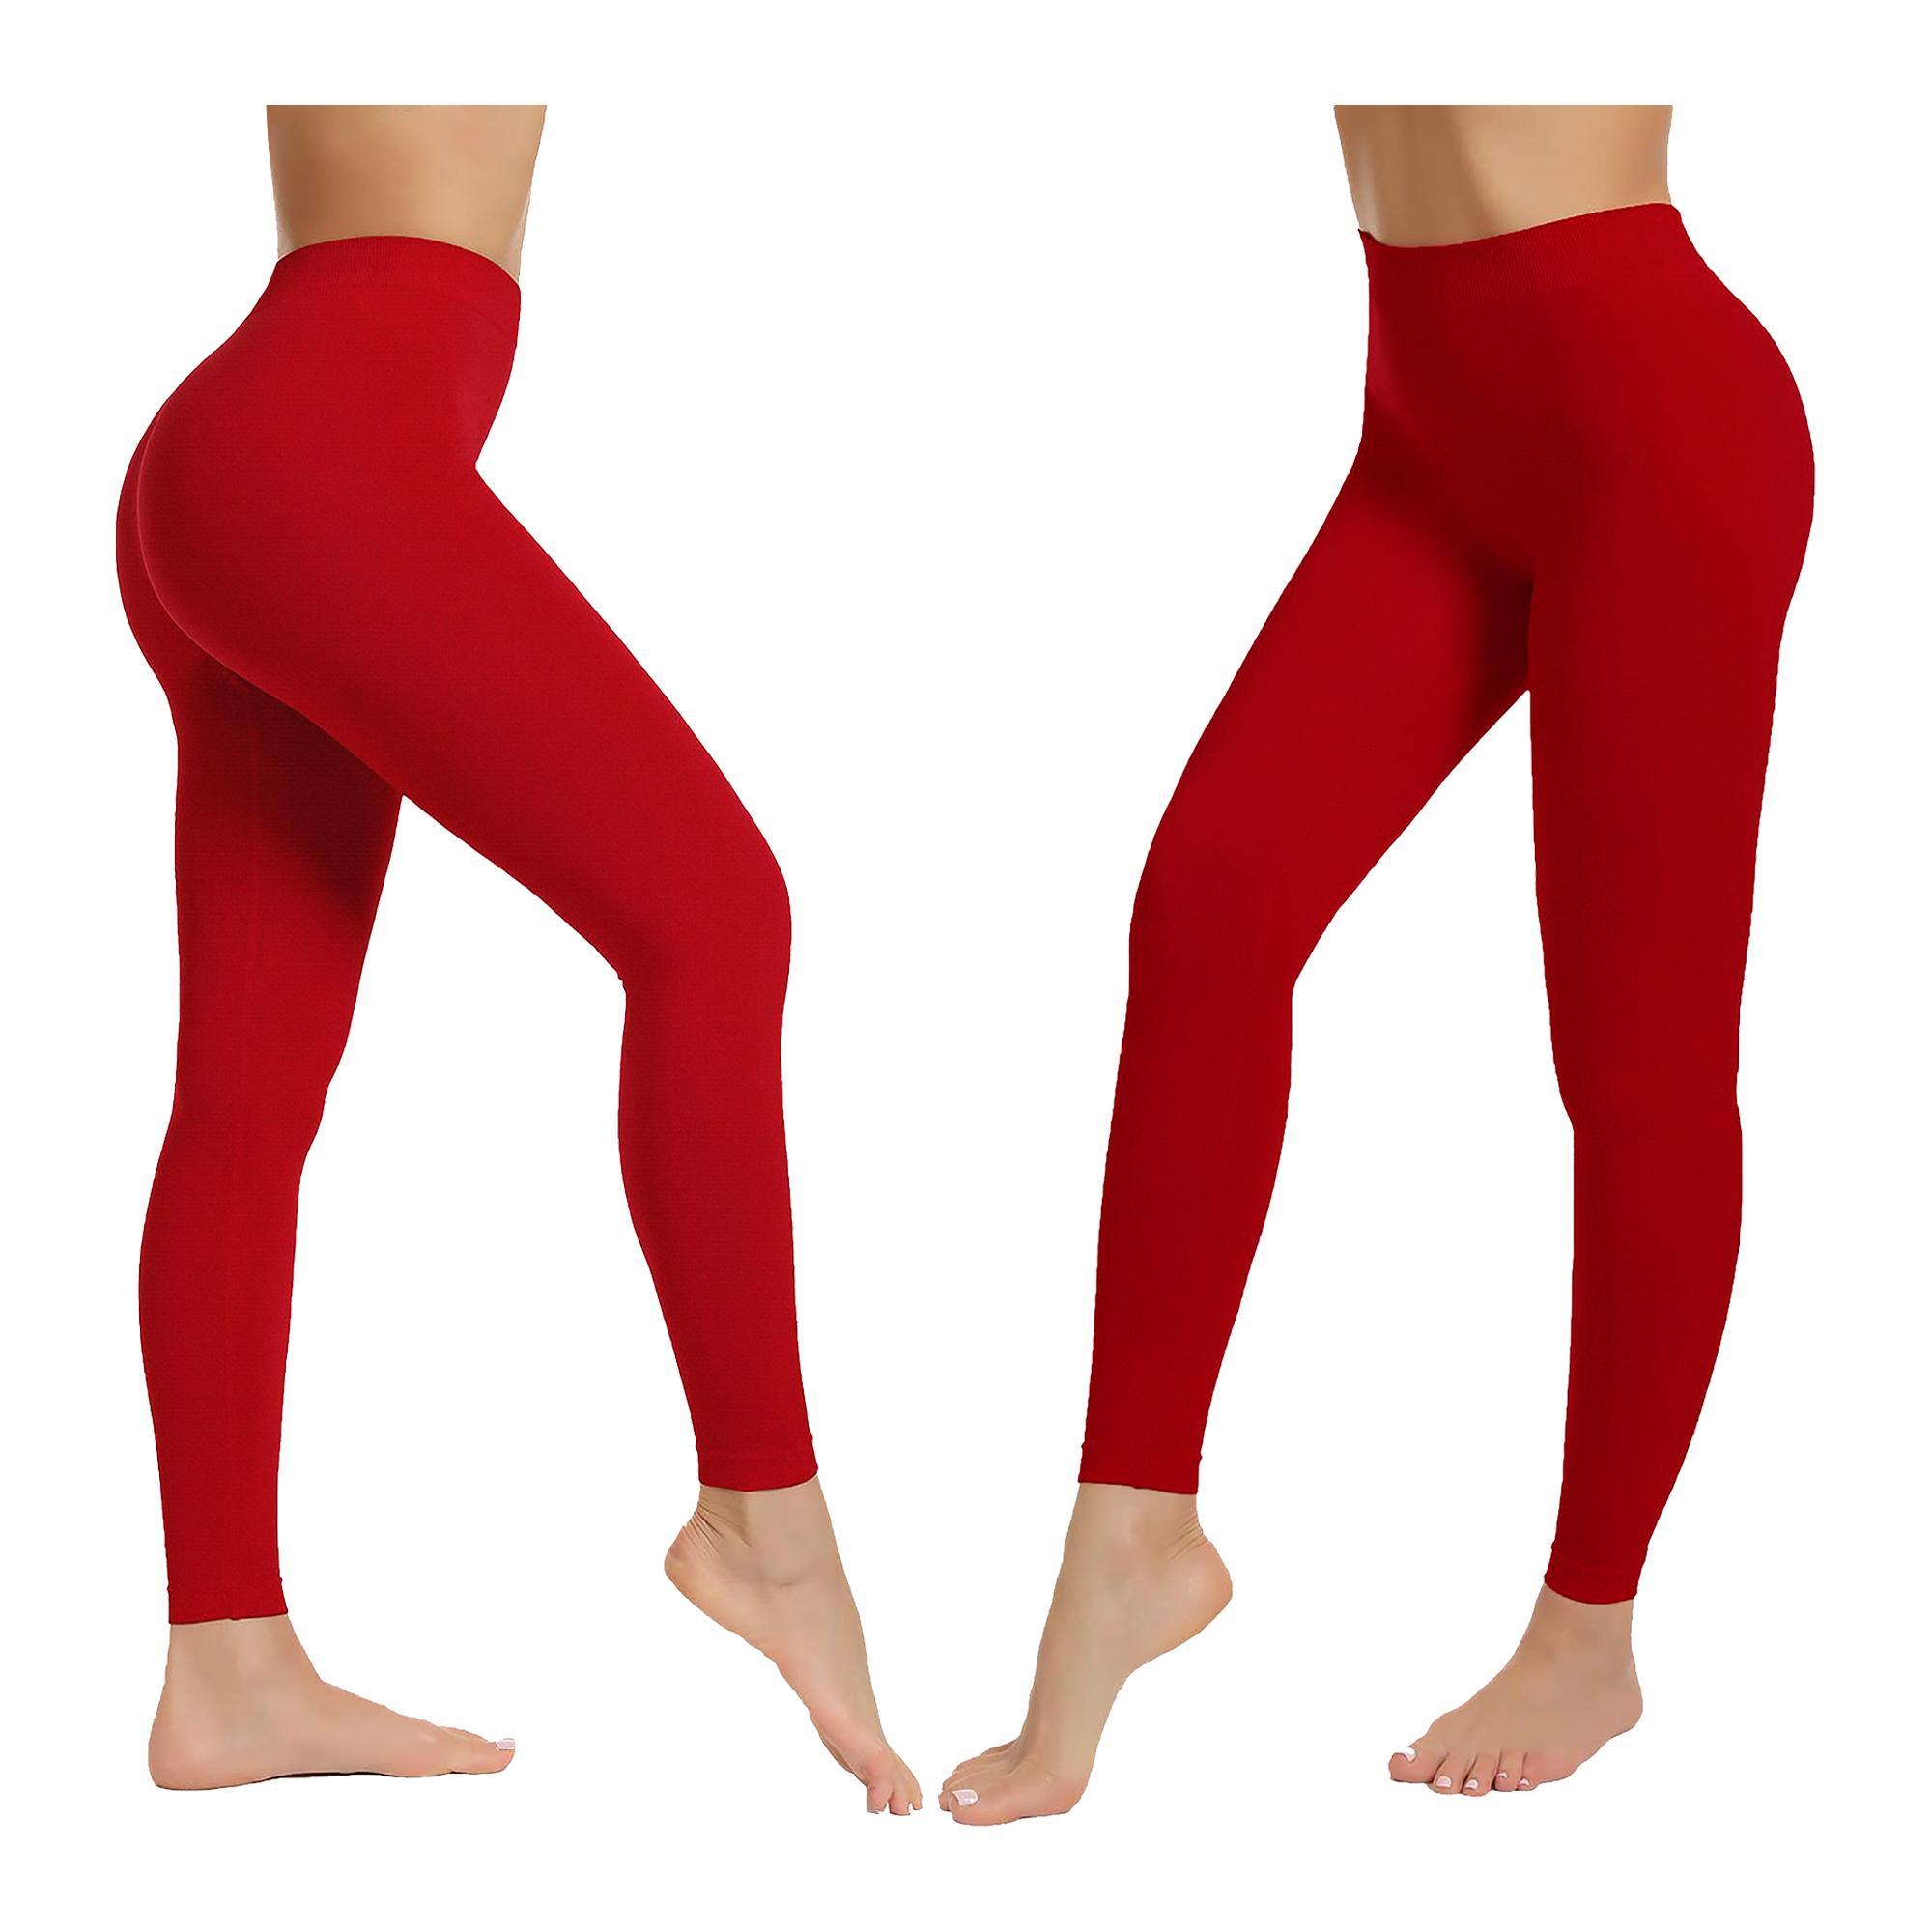 3-Pack: Women's High-Waist Ultra-Soft Stretchy Solid Fitness Yoga Leggings Pants - RED, XL